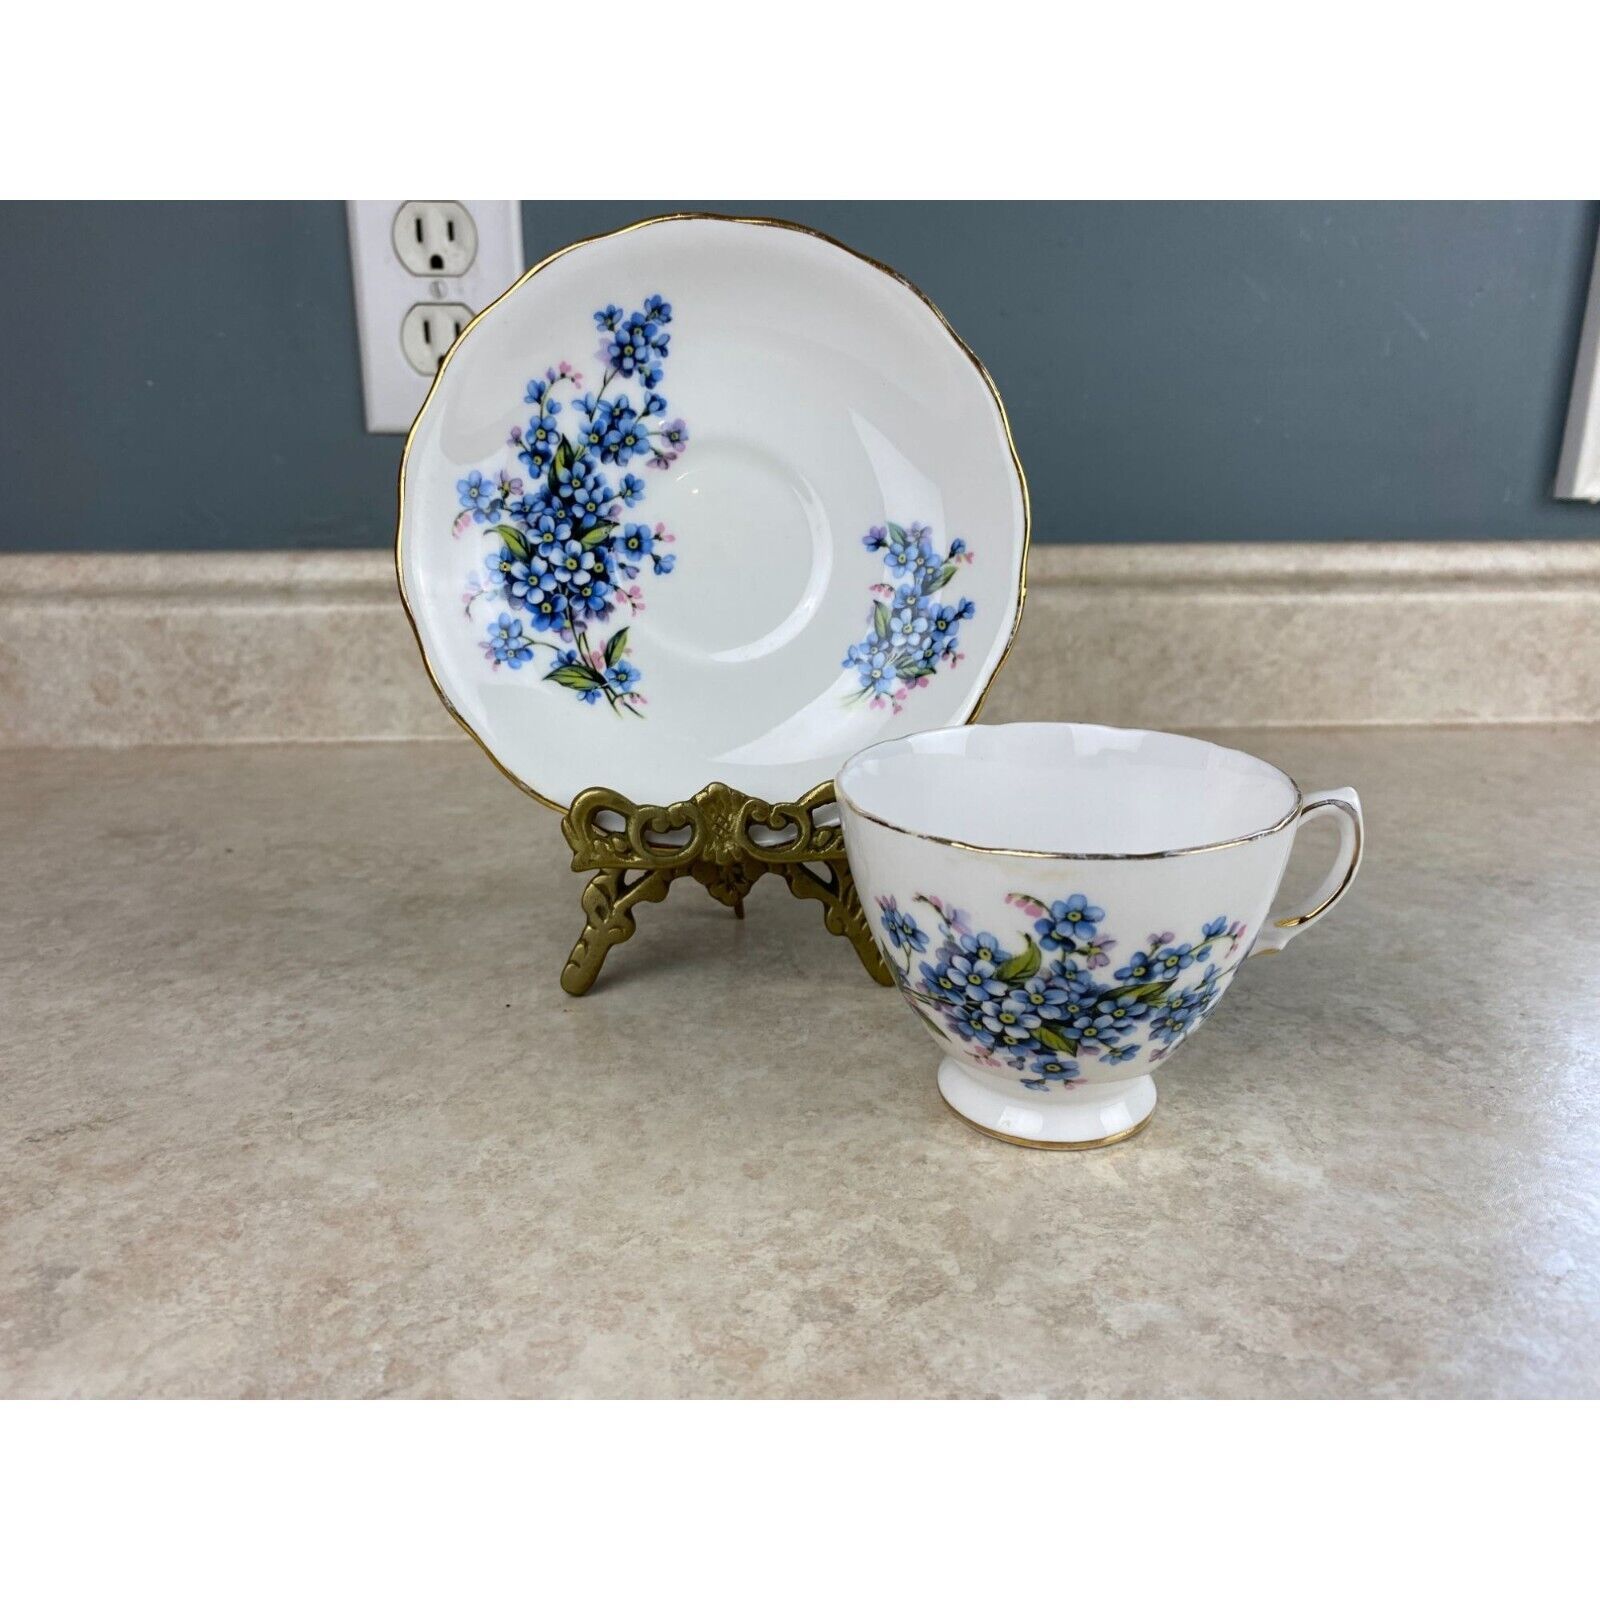 Primary image for Vale Bone China Forget Me Not Floral Tea Cup And Saucer Set